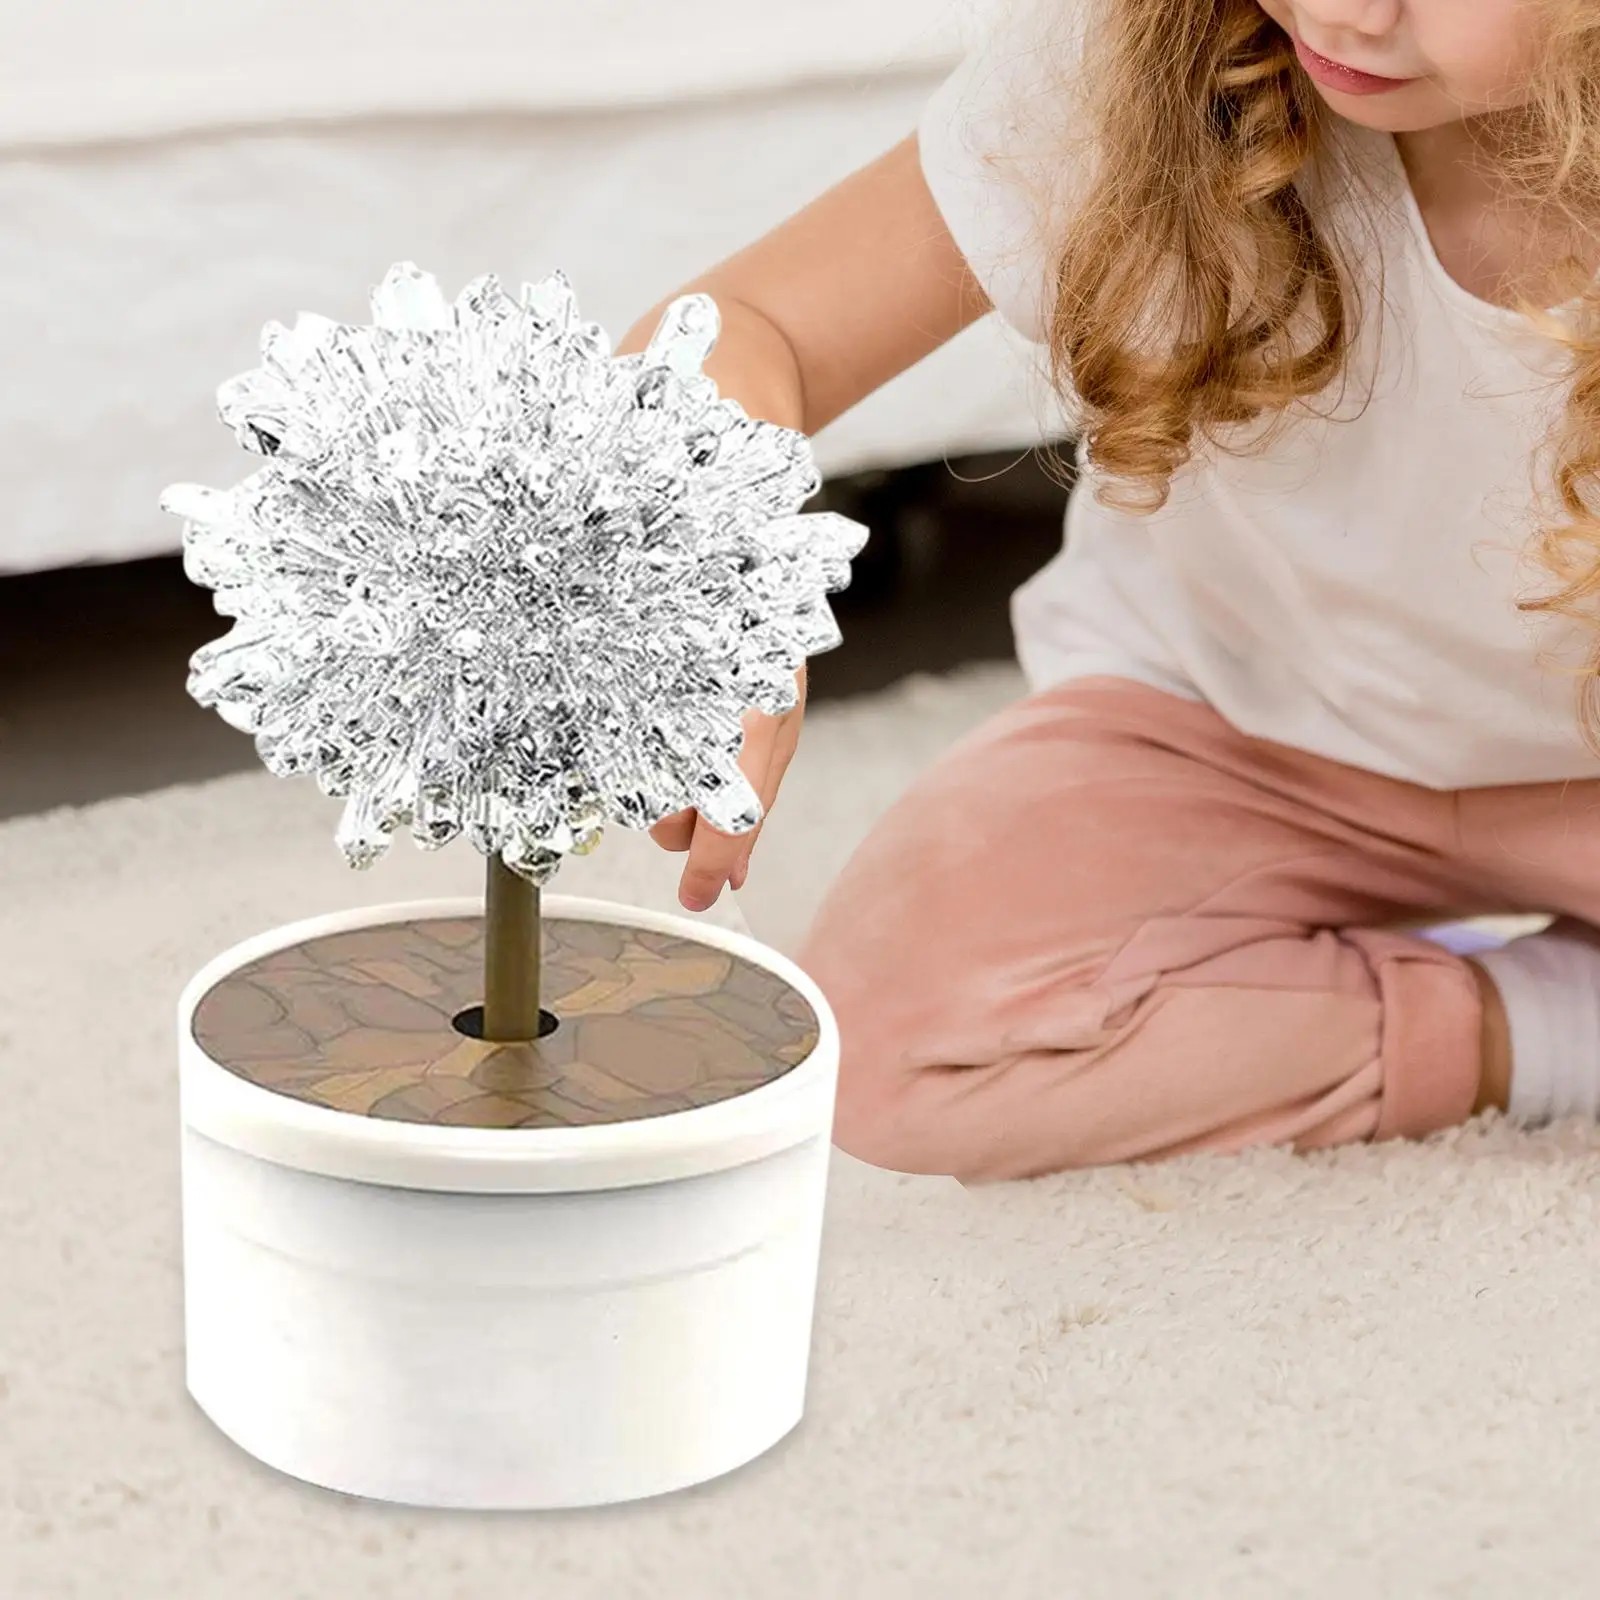 Crystal Trees Growing Kit Educational Toy Science Kits for Teenagers Children